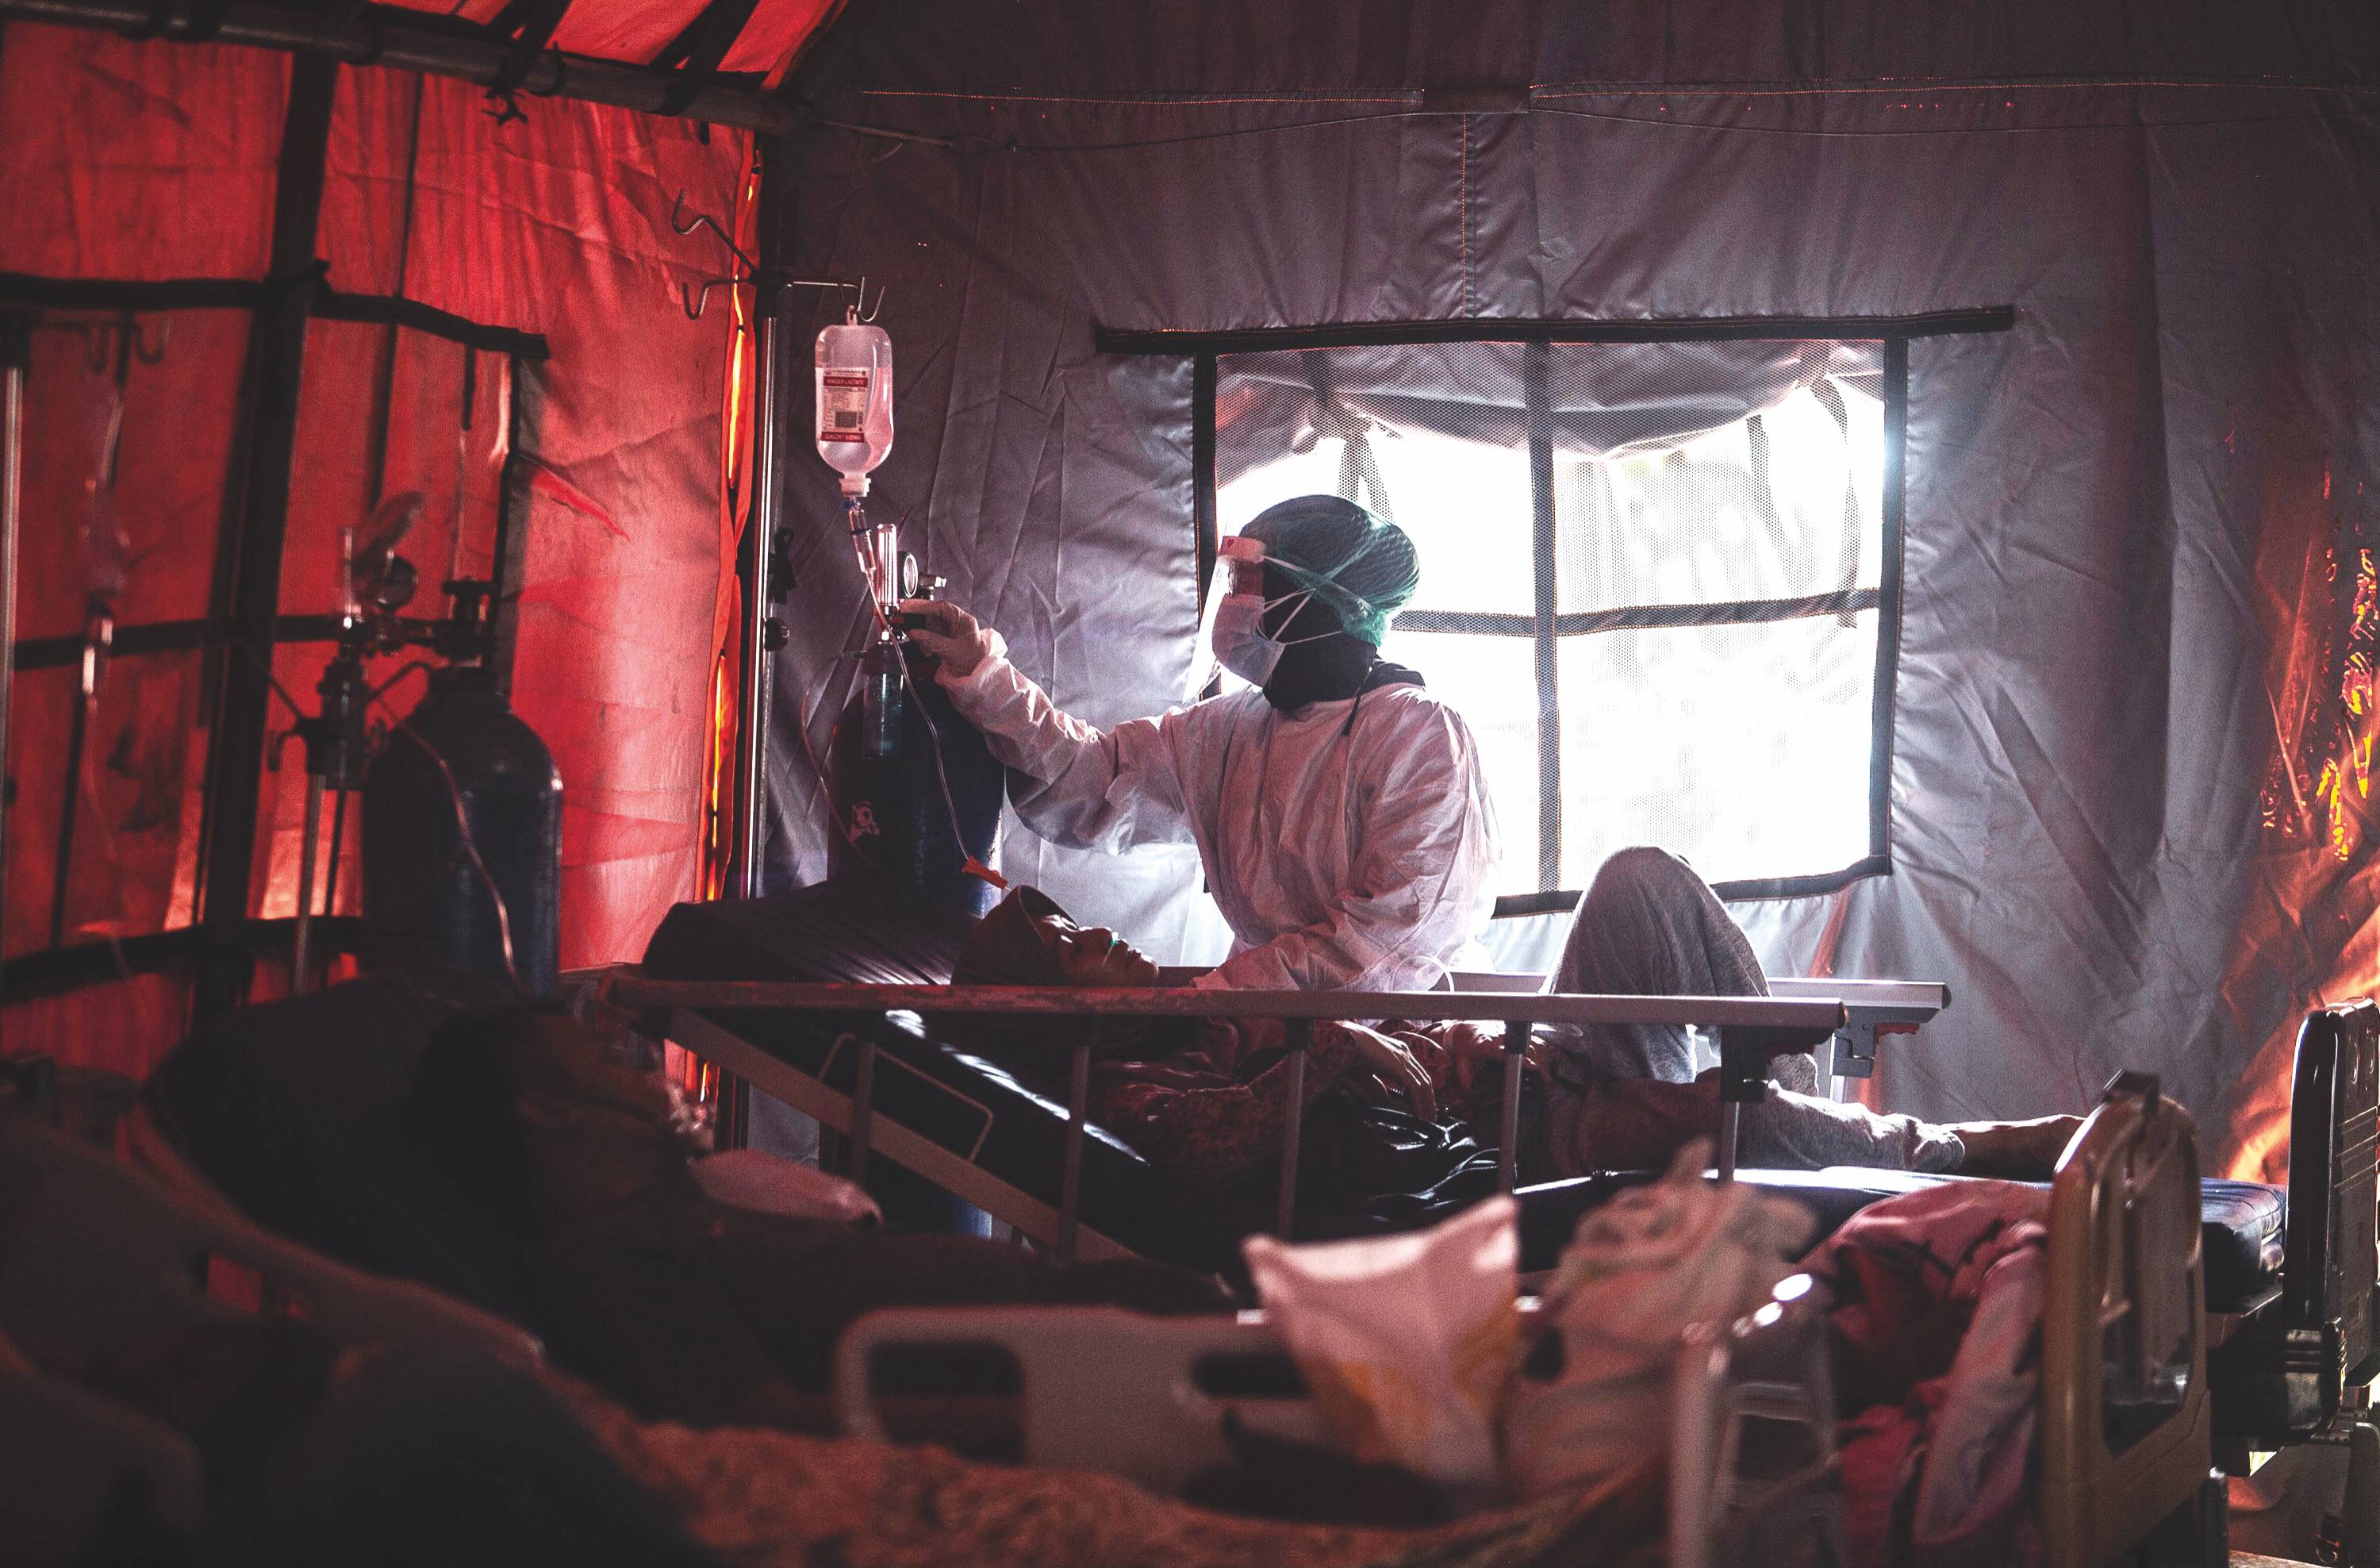 Medical personnel tend to COVID-19 patients in a tent set up outside a hospital in Bogor, Indonesia, in June 2021. | ADITYA AJI / AFP / VIA GETTY IMAGES